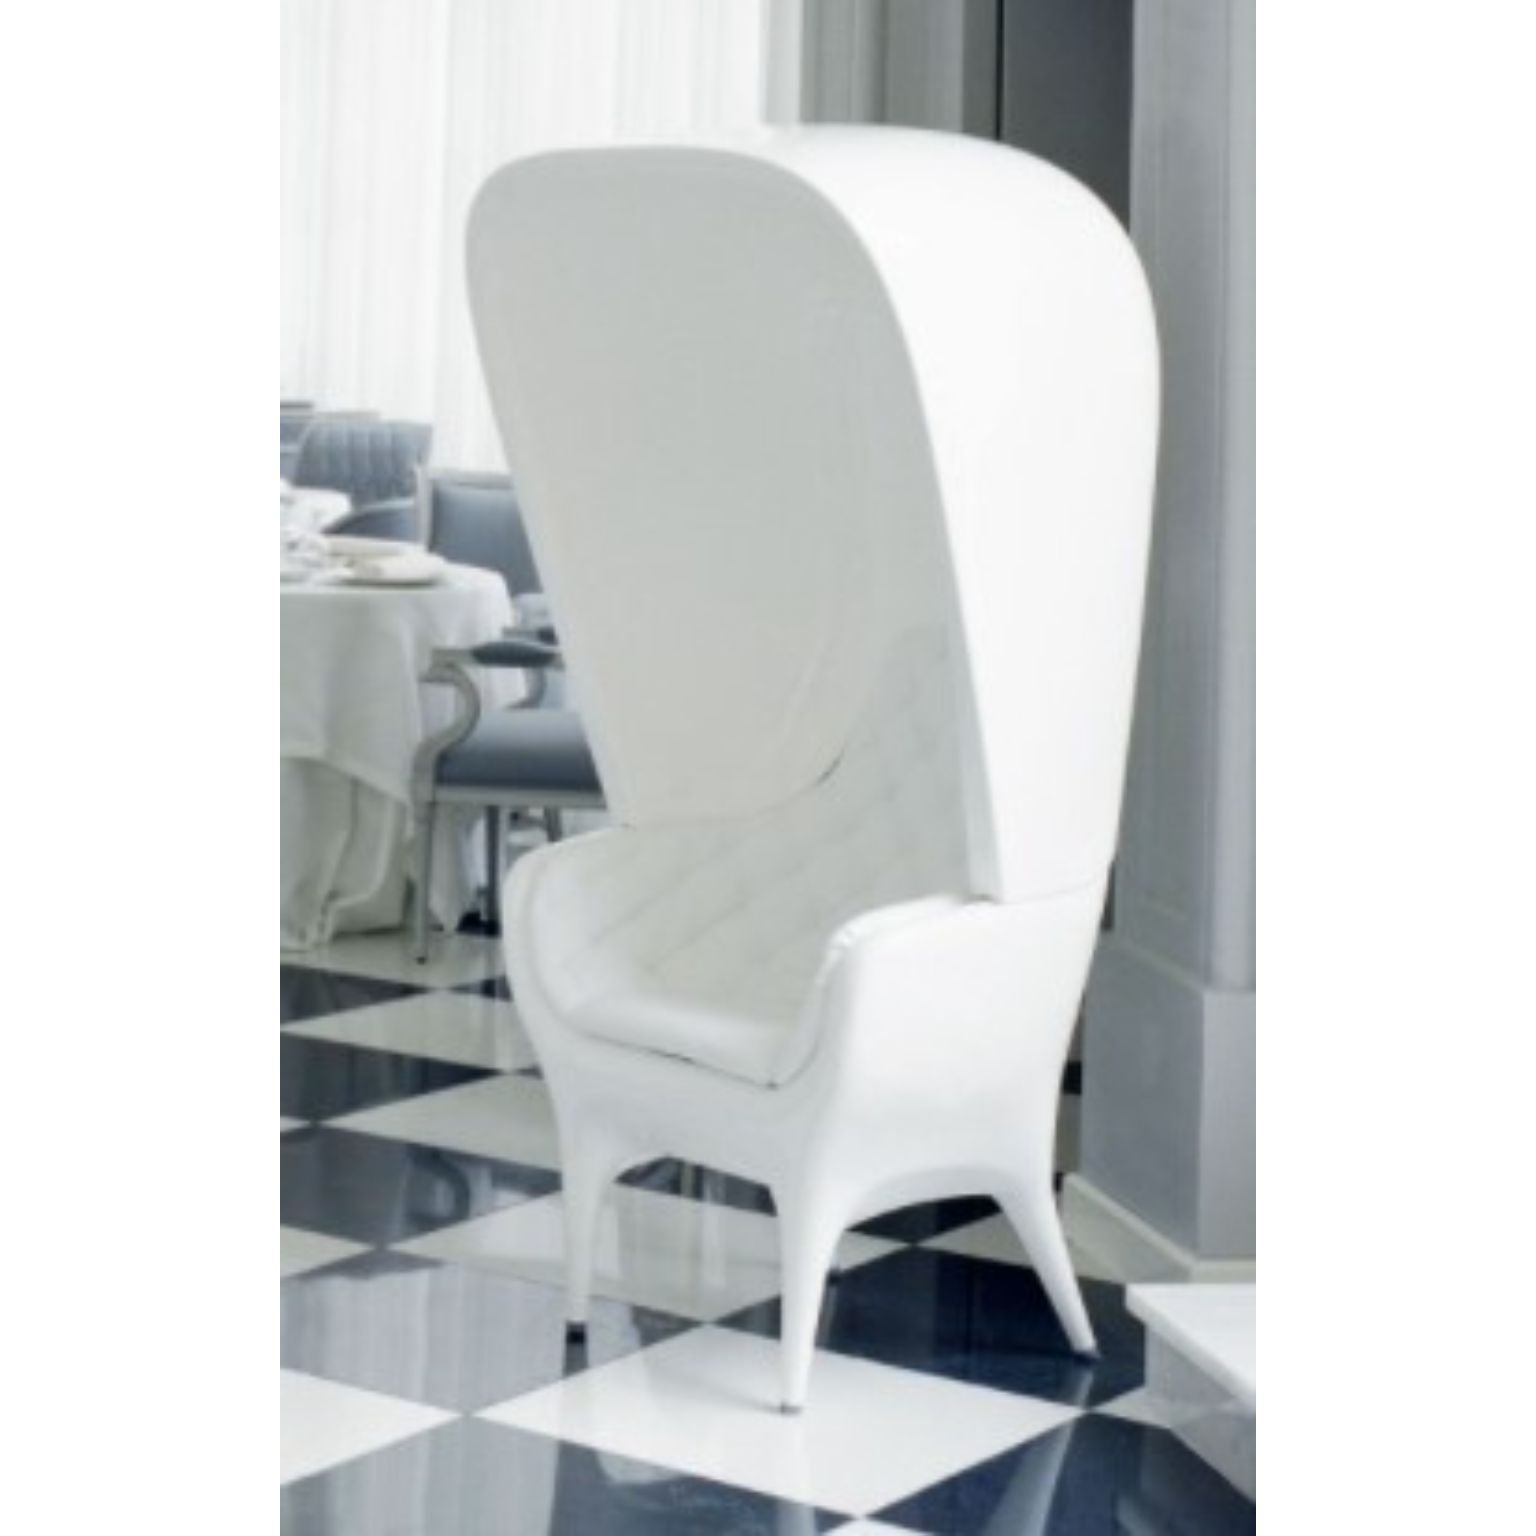 Showtime White armchair with cover
Dimensions: D 82 x W 90 x H 168 cm 
Materials: cover in rotomoulded polyethylene. Upholstered in leather capitoné and bright lacquered.
Available upholstered in different fabrics, lacquered in black or white,